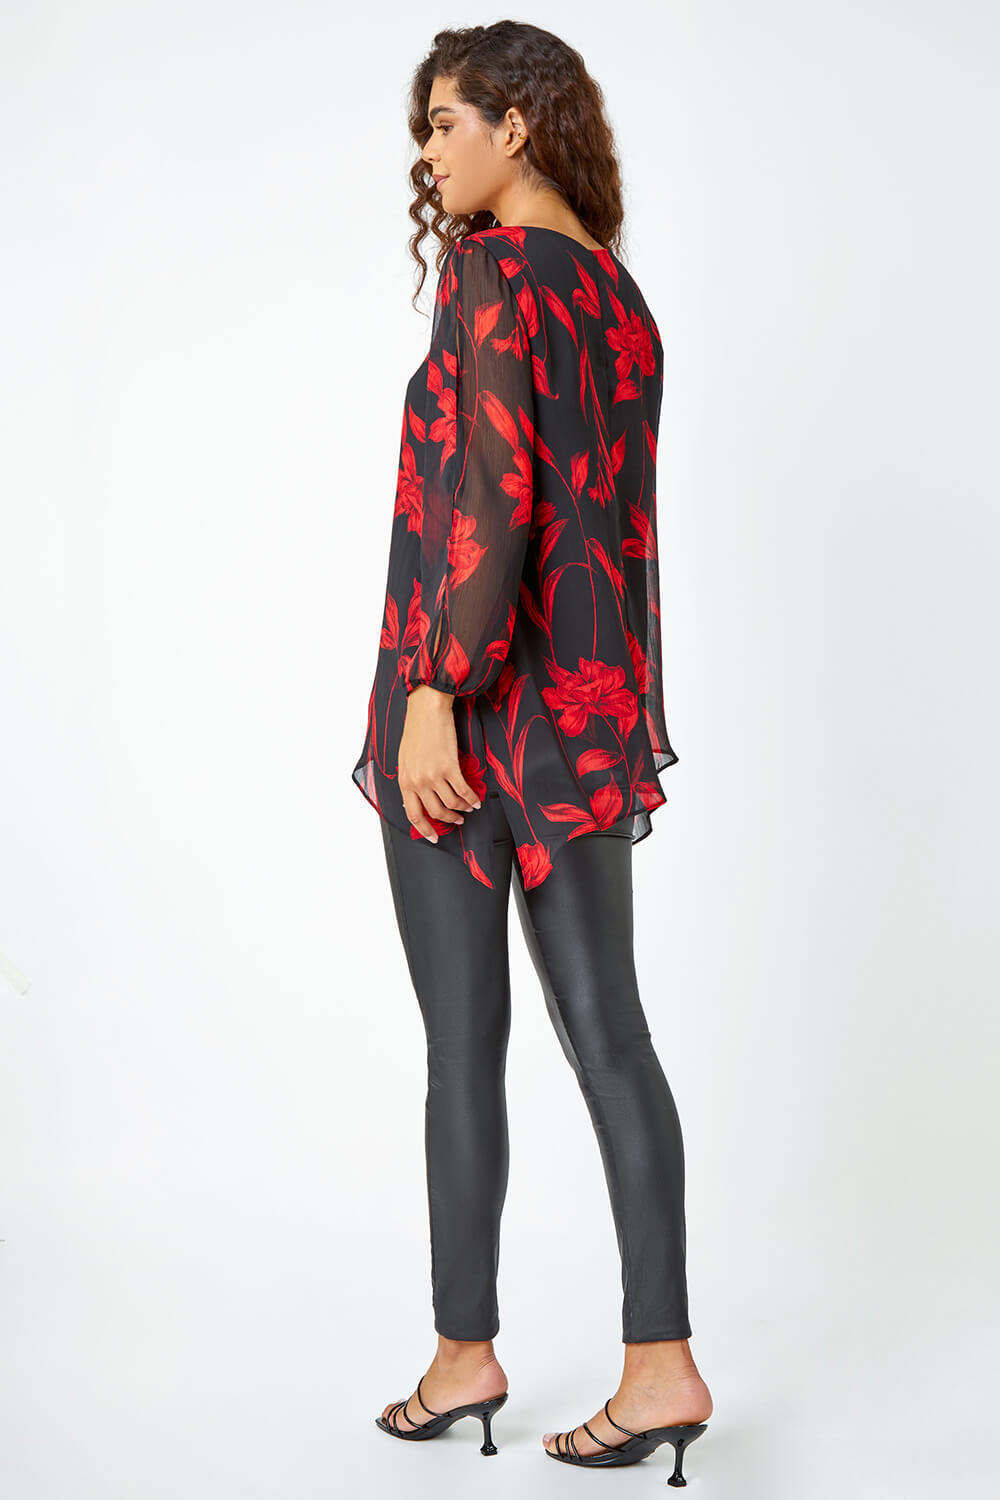 Red Floral Chiffon Layered Tunic Top, Image 3 of 5